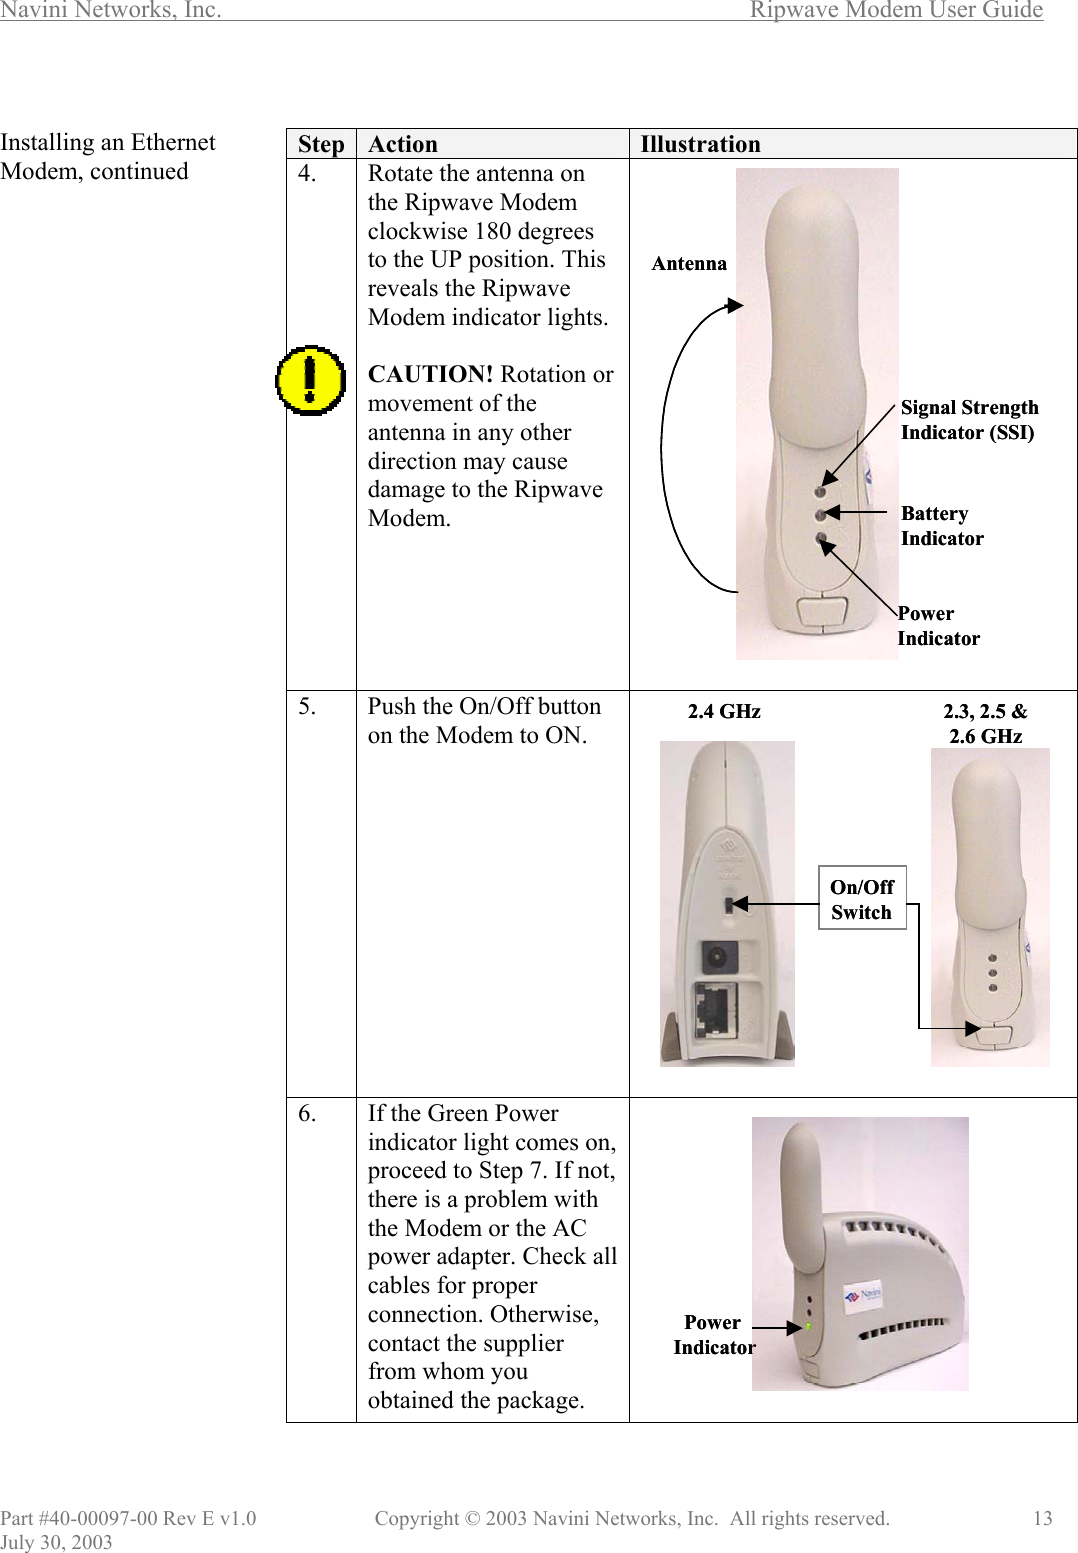 Navini Networks, Inc.        Ripwave Modem User Guide Part #40-00097-00 Rev E v1.0    Copyright © 2003 Navini Networks, Inc.  All rights reserved.               13 July 30, 2003  Installing an Ethernet Modem, continued                                             Step  Action  Illustration 4.  Rotate the antenna on the Ripwave Modem clockwise 180 degrees to the UP position. This reveals the Ripwave Modem indicator lights.  CAUTION! Rotation or movement of the antenna in any other direction may cause damage to the Ripwave Modem.  5.  Push the On/Off button on the Modem to ON.  6.  If the Green Power indicator light comes on, proceed to Step 7. If not, there is a problem with the Modem or the AC power adapter. Check all cables for proper connection. Otherwise, contact the supplier from whom you obtained the package.   Signal Strength Indicator (SSI)Power IndicatorBattery IndicatorAntennaSignal Strength Indicator (SSI)Power IndicatorBattery IndicatorAntennaOn/Off Switch2.4 GHz  2.3, 2.5 &amp;2.6 GHz On/Off Switch2.4 GHz  2.3, 2.5 &amp;2.6 GHz PowerIndicatorPowerIndicator